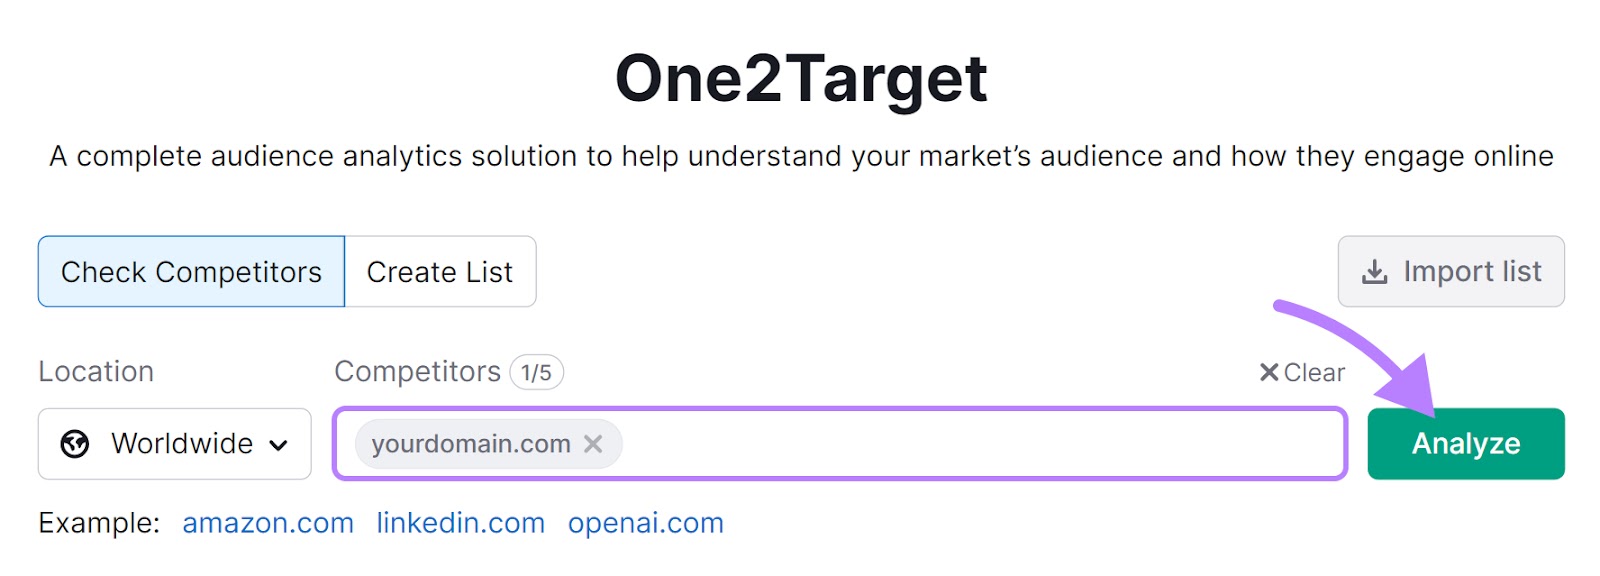 One2Target tool search